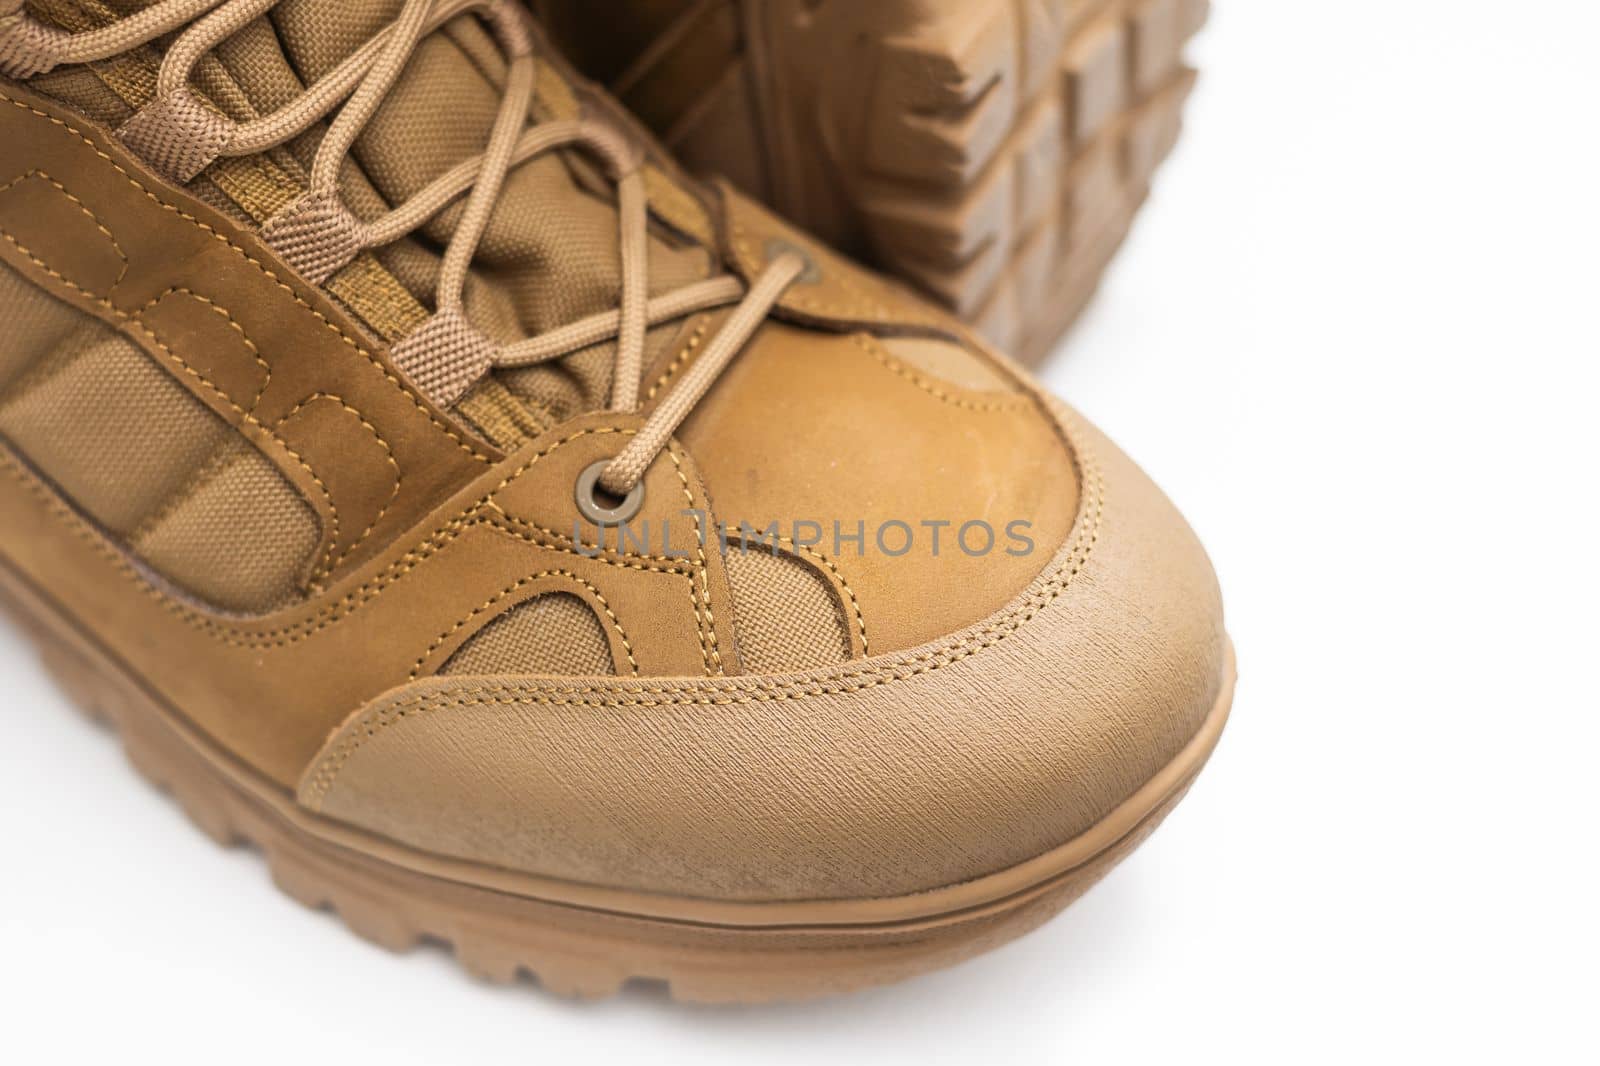 Tactical military boots for the army. by Andelov13